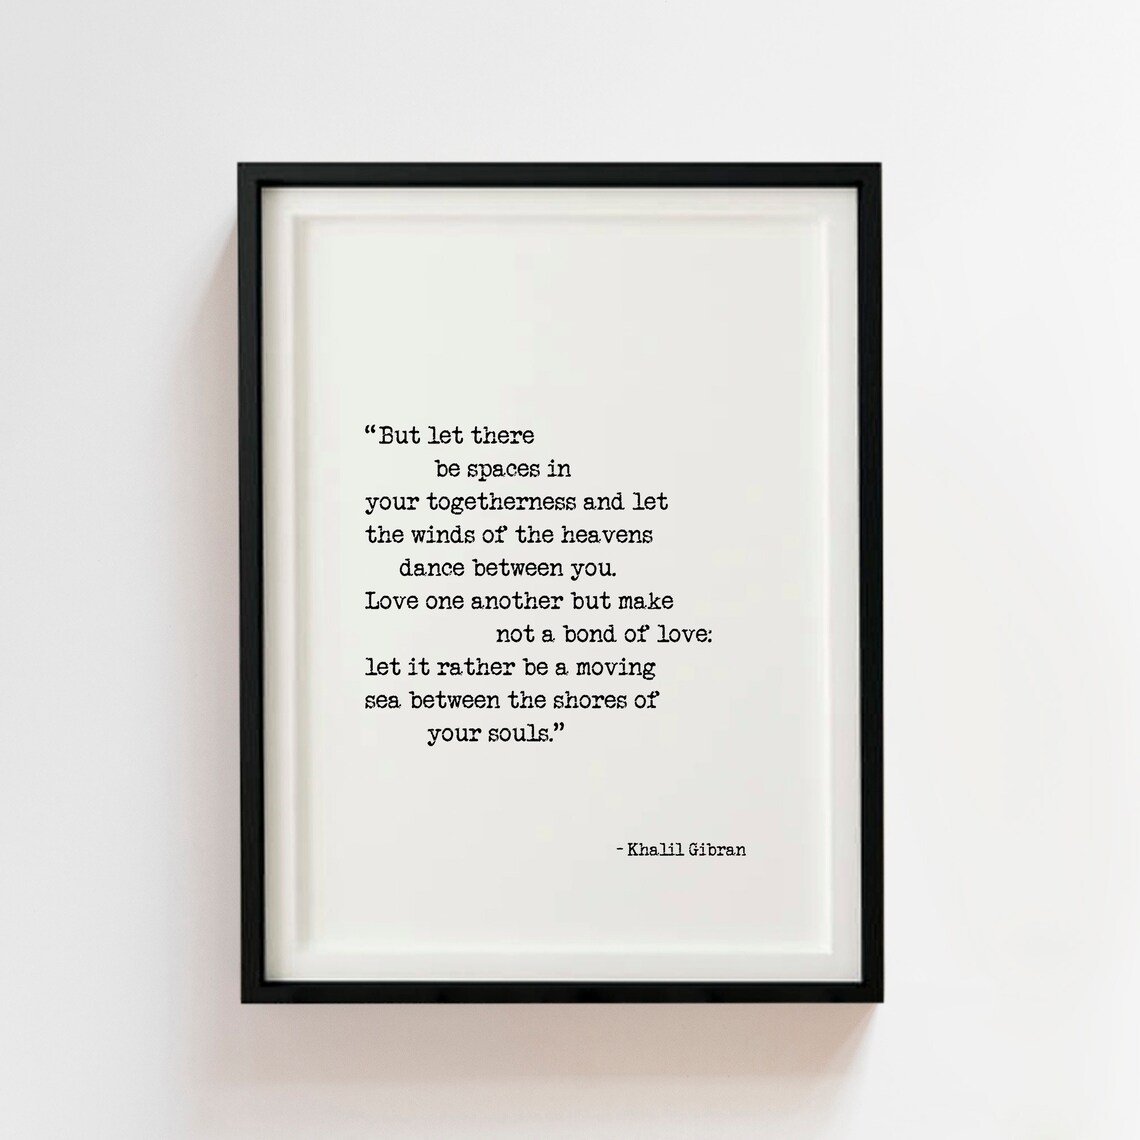 Khalil Gibran But let there be spaces quote printable on | Etsy